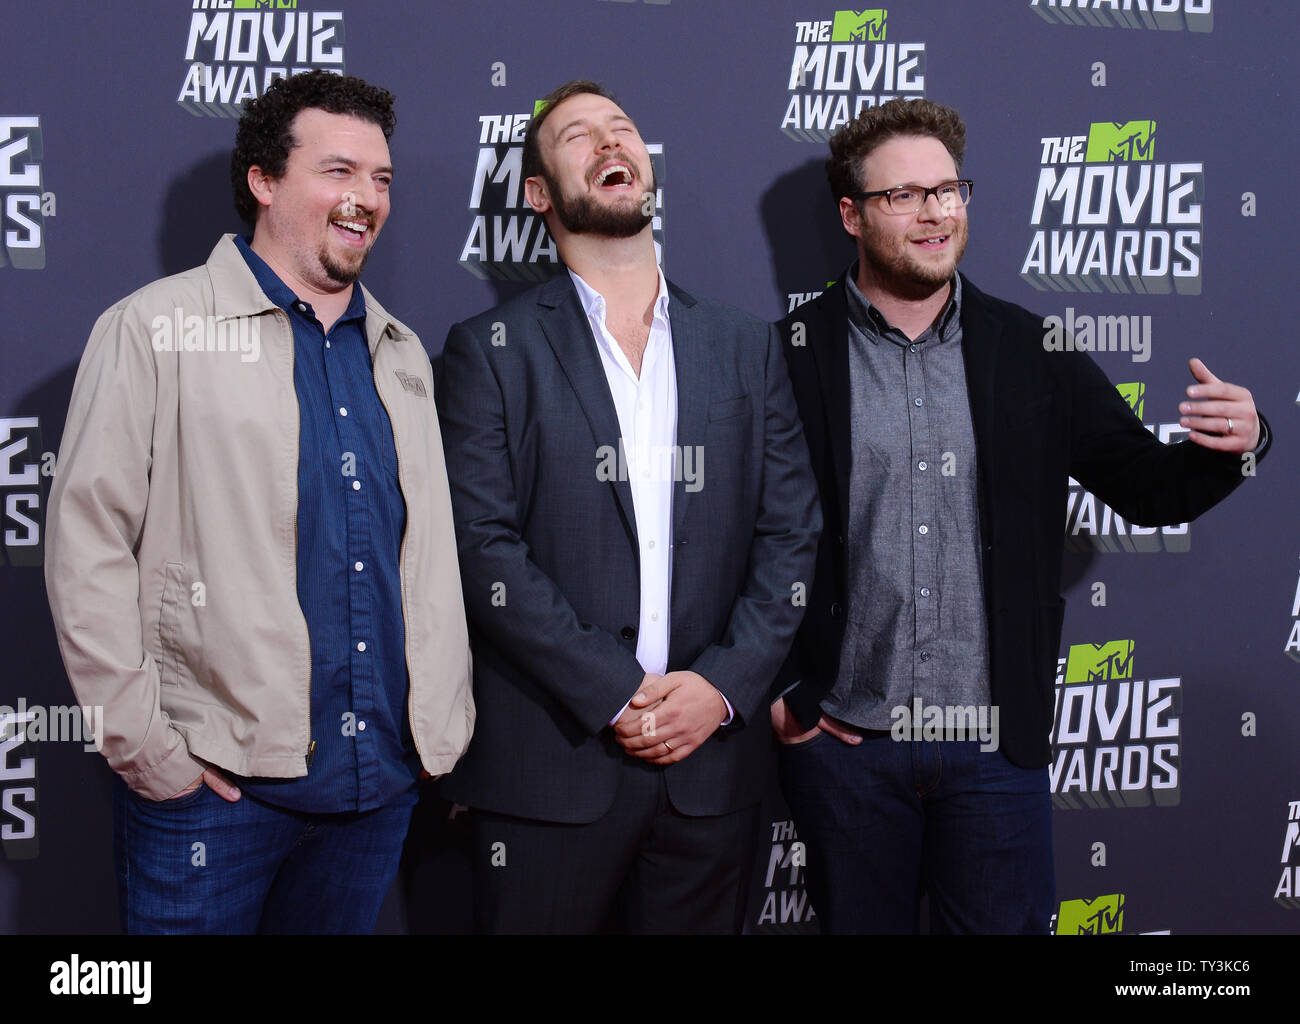 Actor Danny McBride, director Evan Goldberg and actor Seth Rogen arrive for The MTV Movie Awards at Sony Picture Studios in Culver City, California on April 14, 2013.  UPI/Jim Ruymen Stock Photo